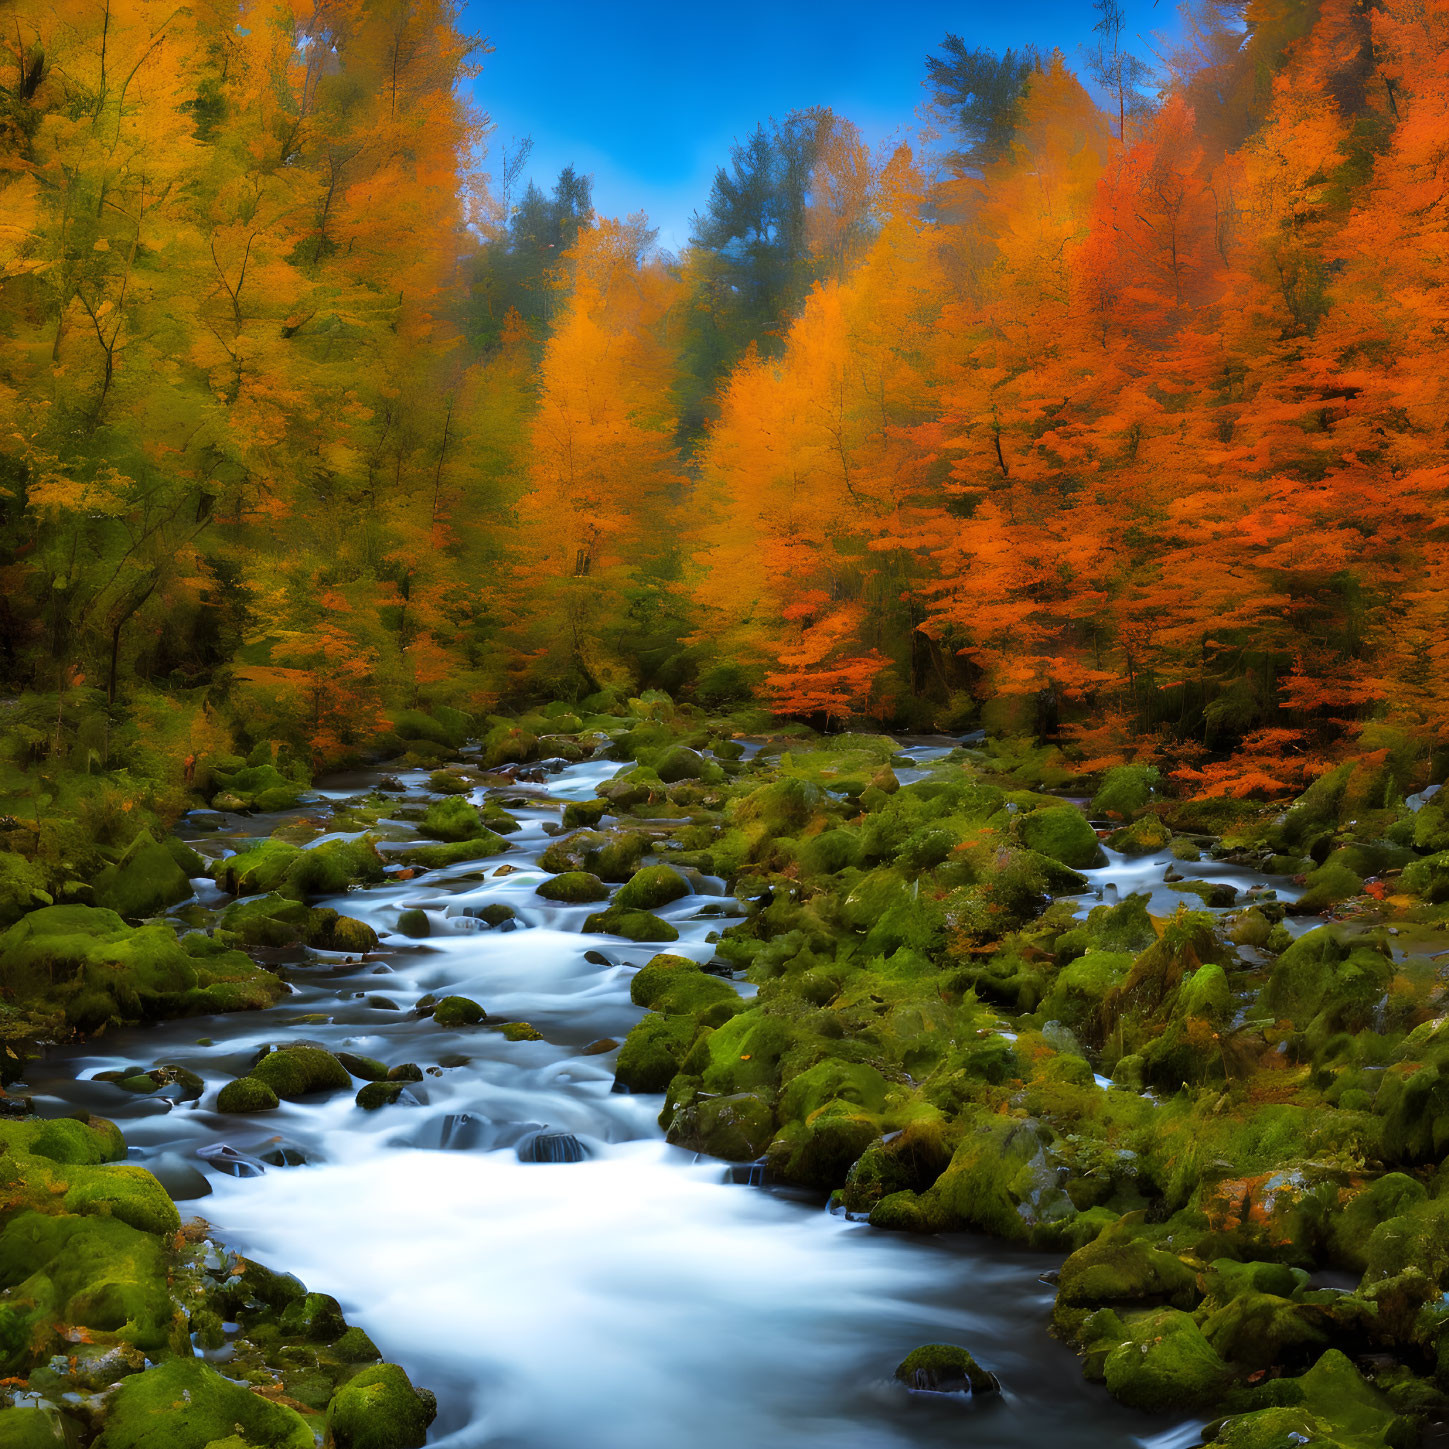 Tranquil autumn stream with vibrant foliage and moss-covered rocks